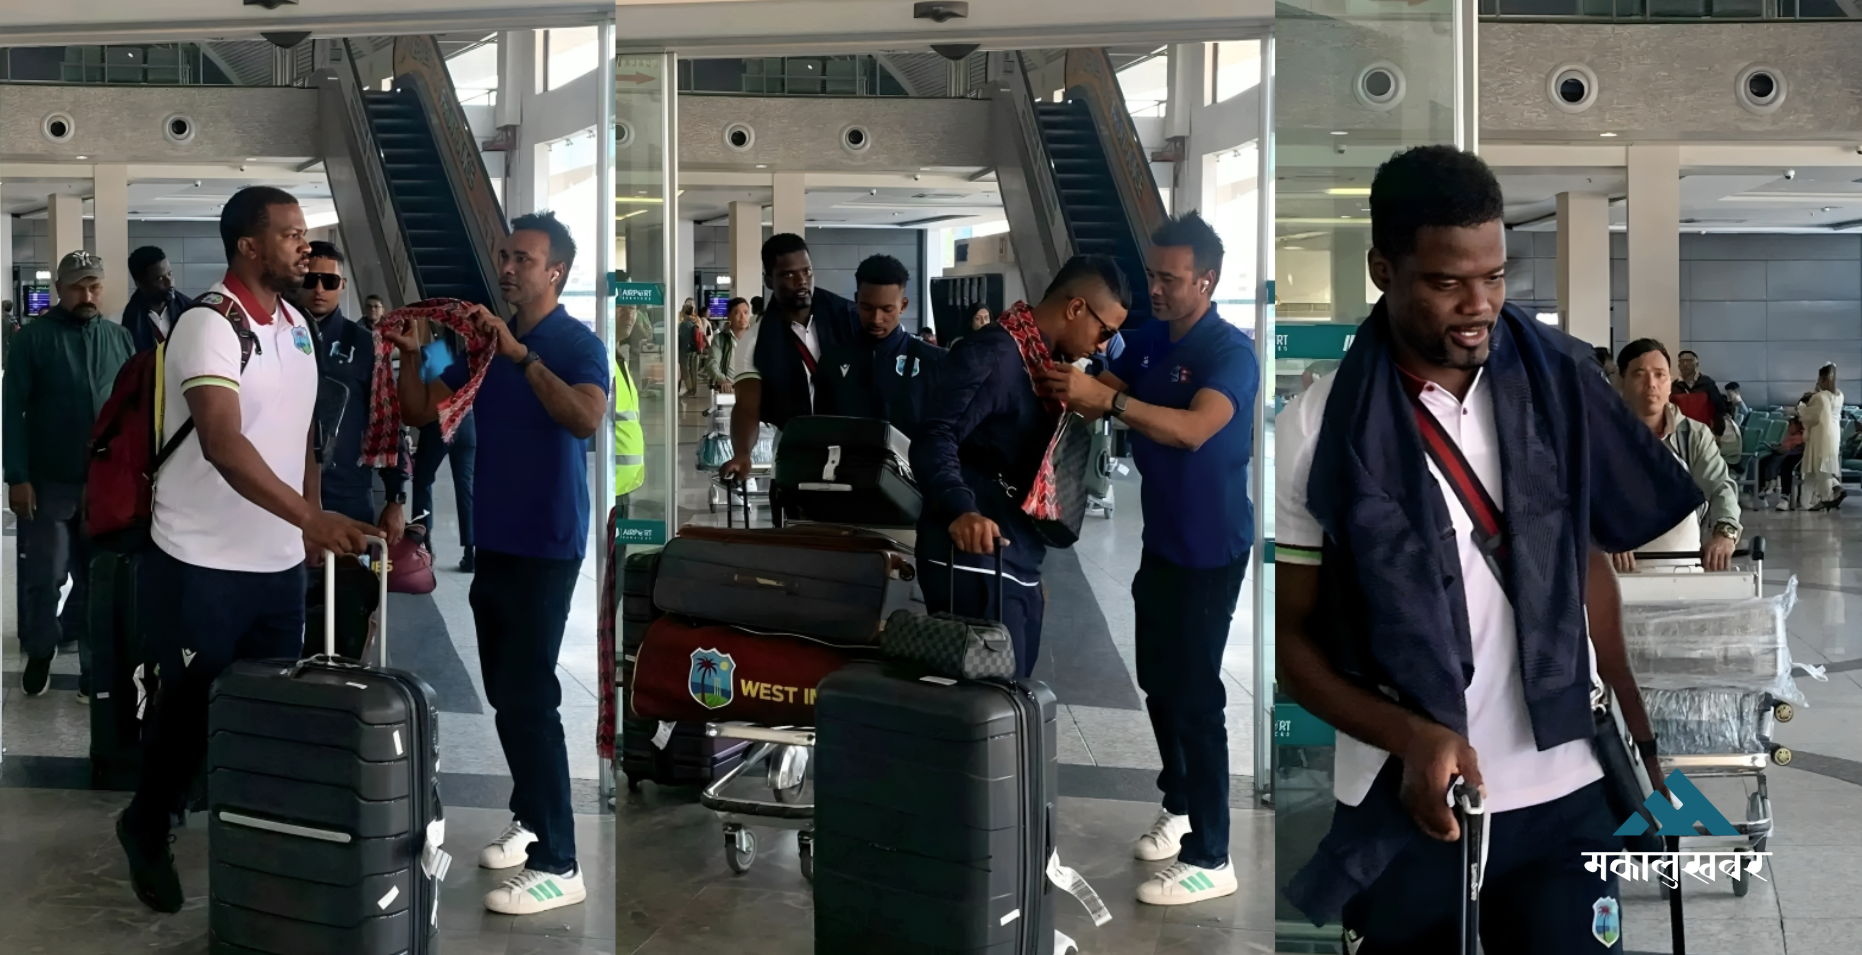 West Indies cricket team, winner of Two World Cups, arrives in Nepal (photos)